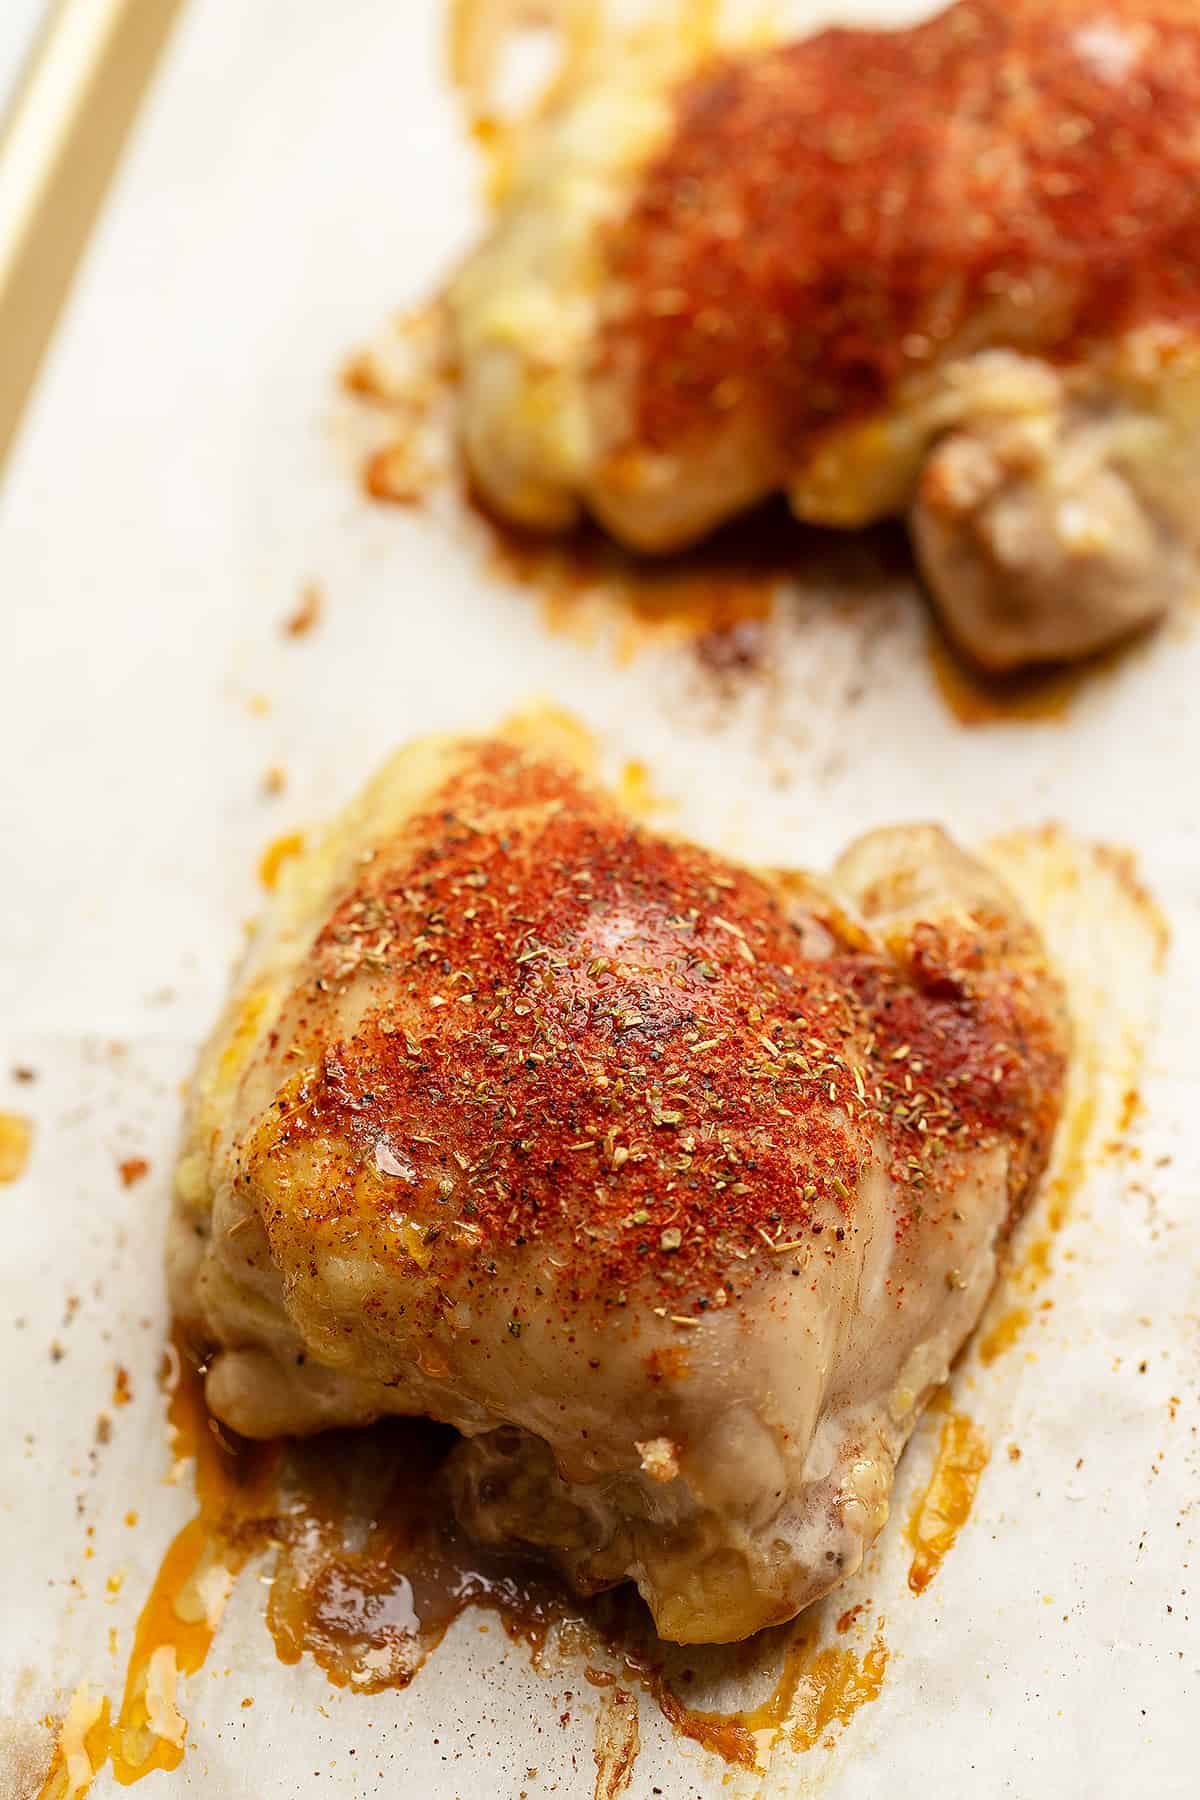 Baked Boneless Chicken Thighs - Rotisserie Seasoned • Low Carb with ...